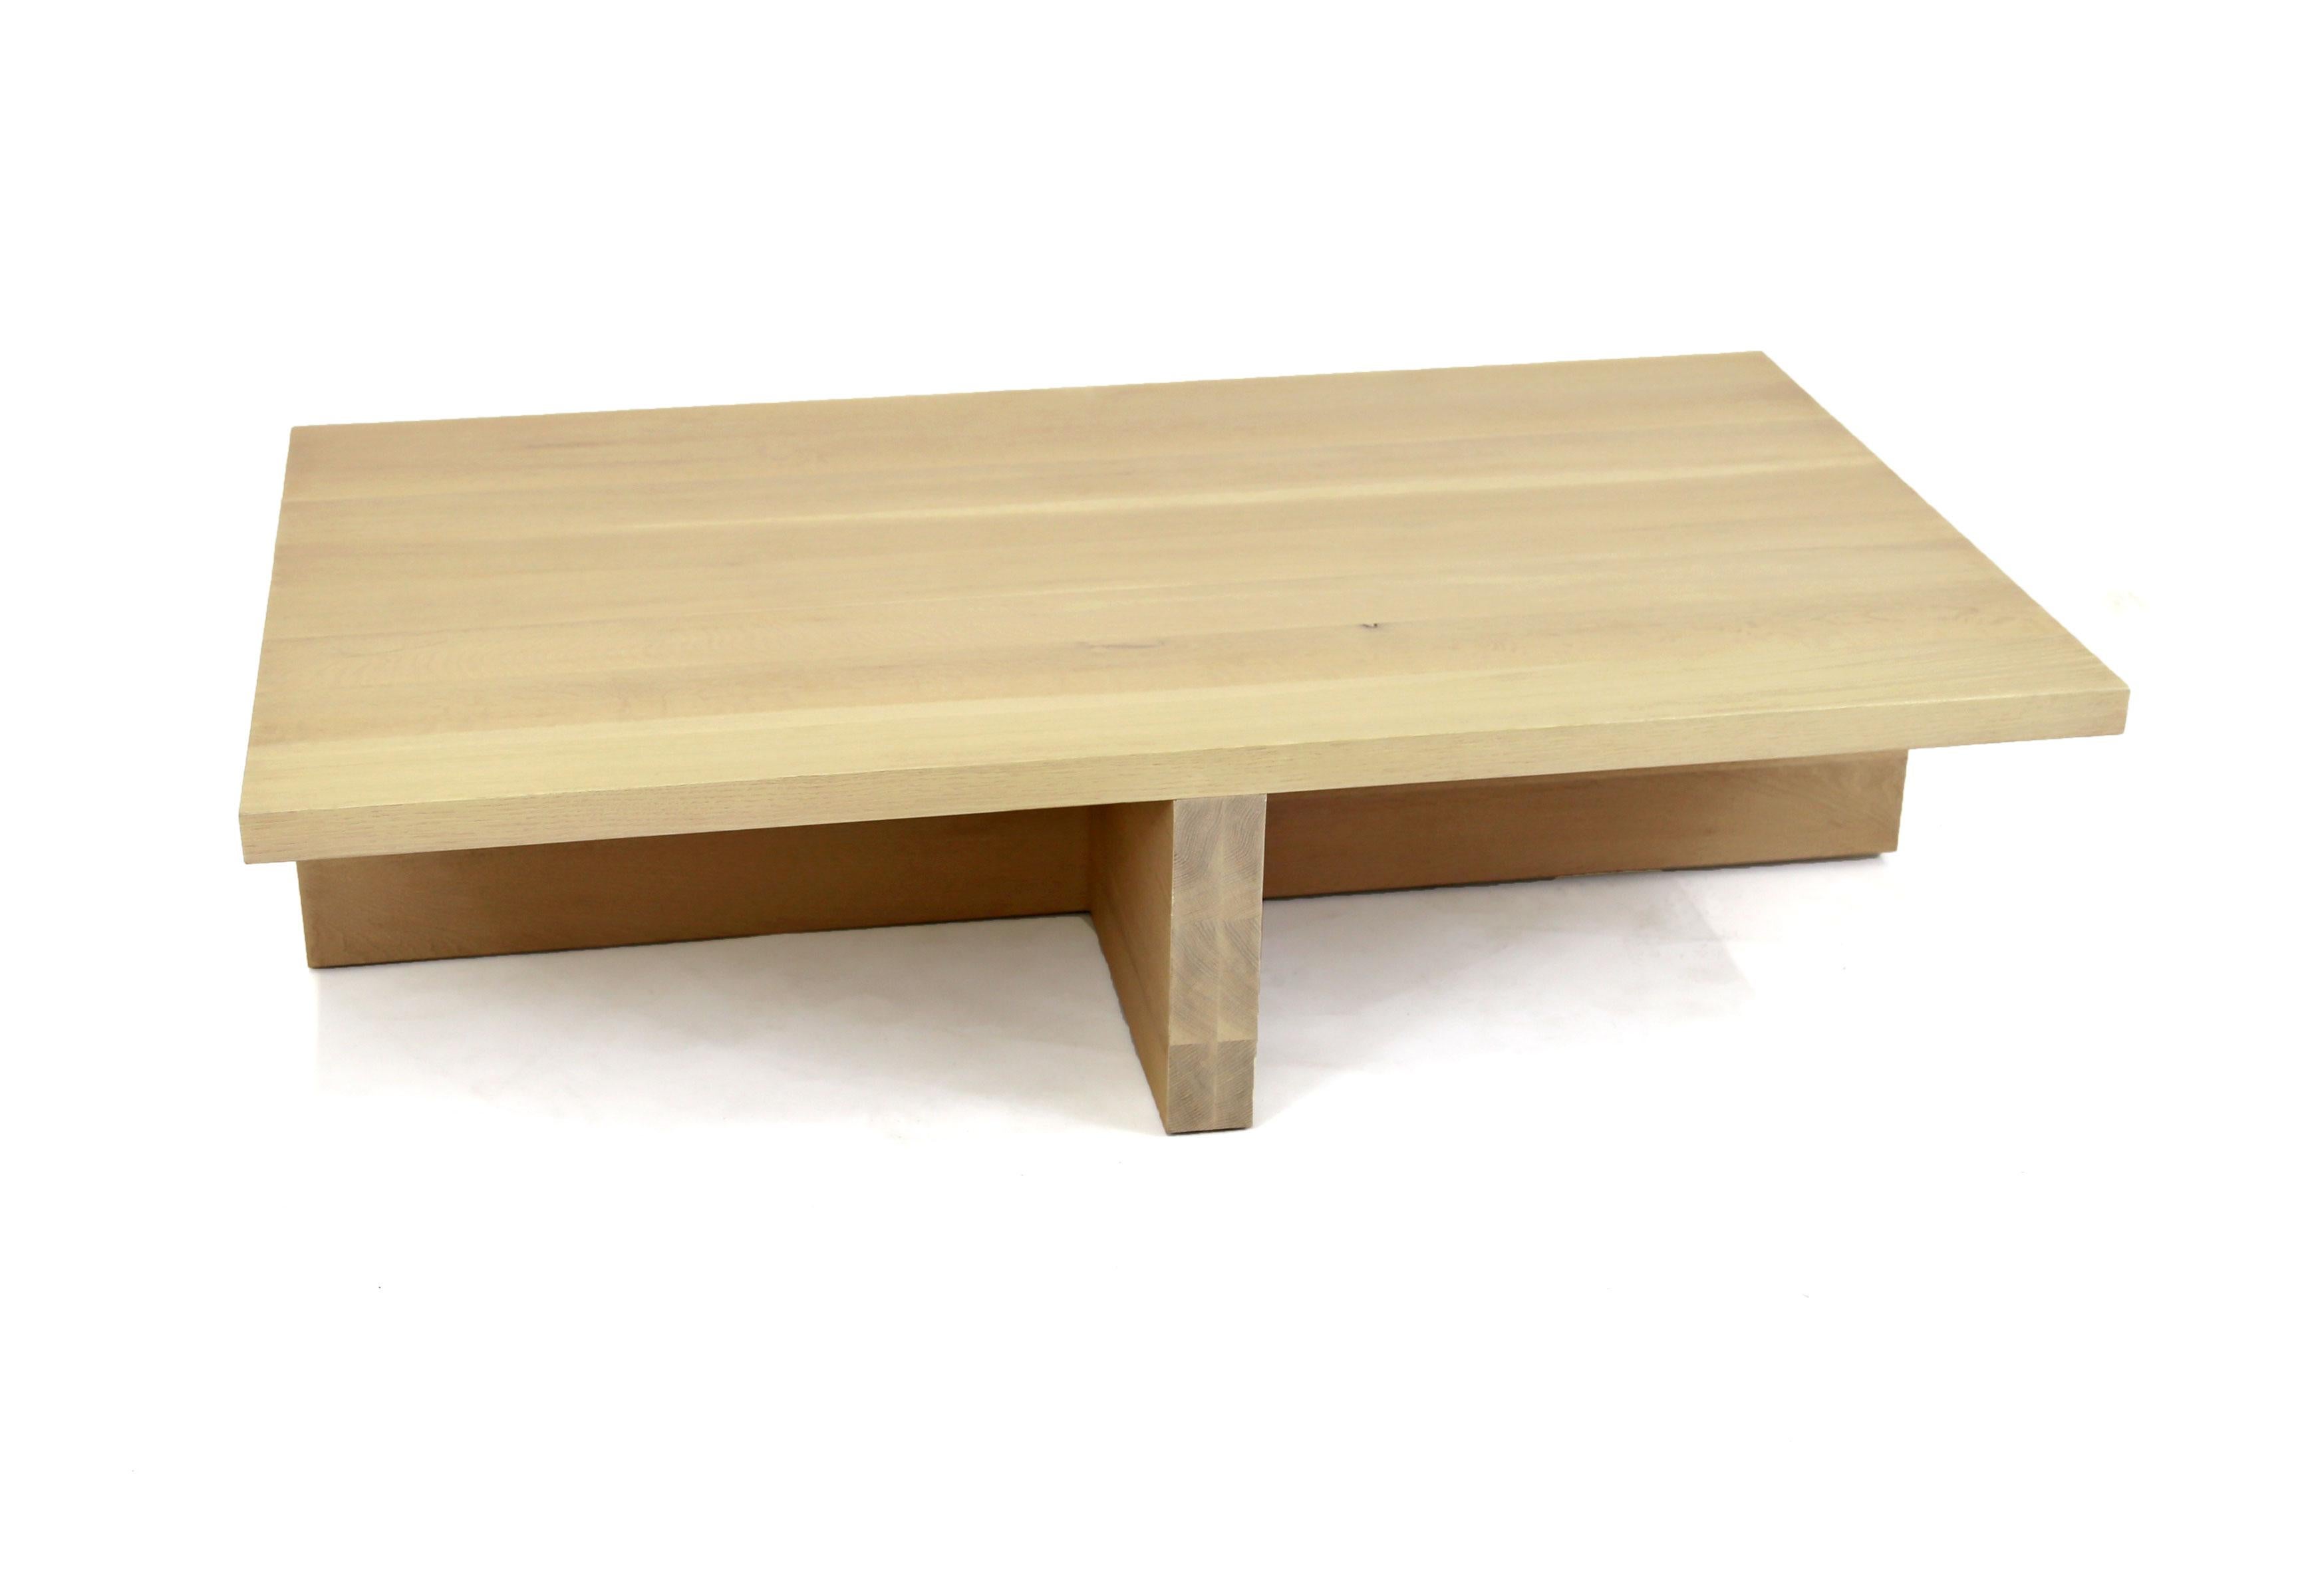 A simple hardwood coffee table that is minimal in design and allows the white oak grain to speak for itself. Each piece is custom-made to order in our Brooklyn workshop. 
Each piece will vary considering the unique grain patterns of real wood.